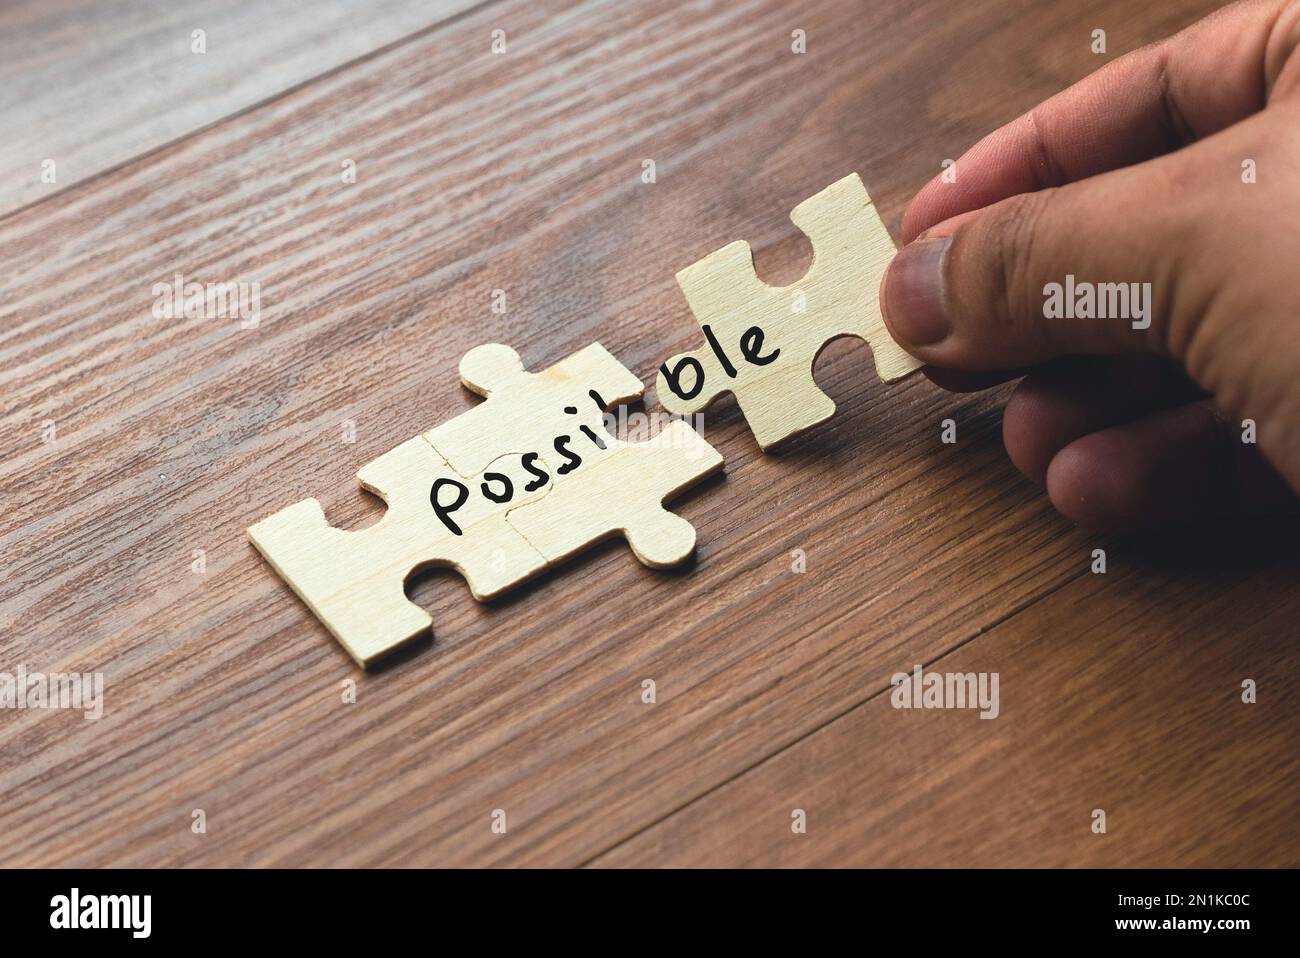 A hand holding puzzle pieces with word possible spread over two section. Concept of problem solving and overcoming challenges. Stock Photo